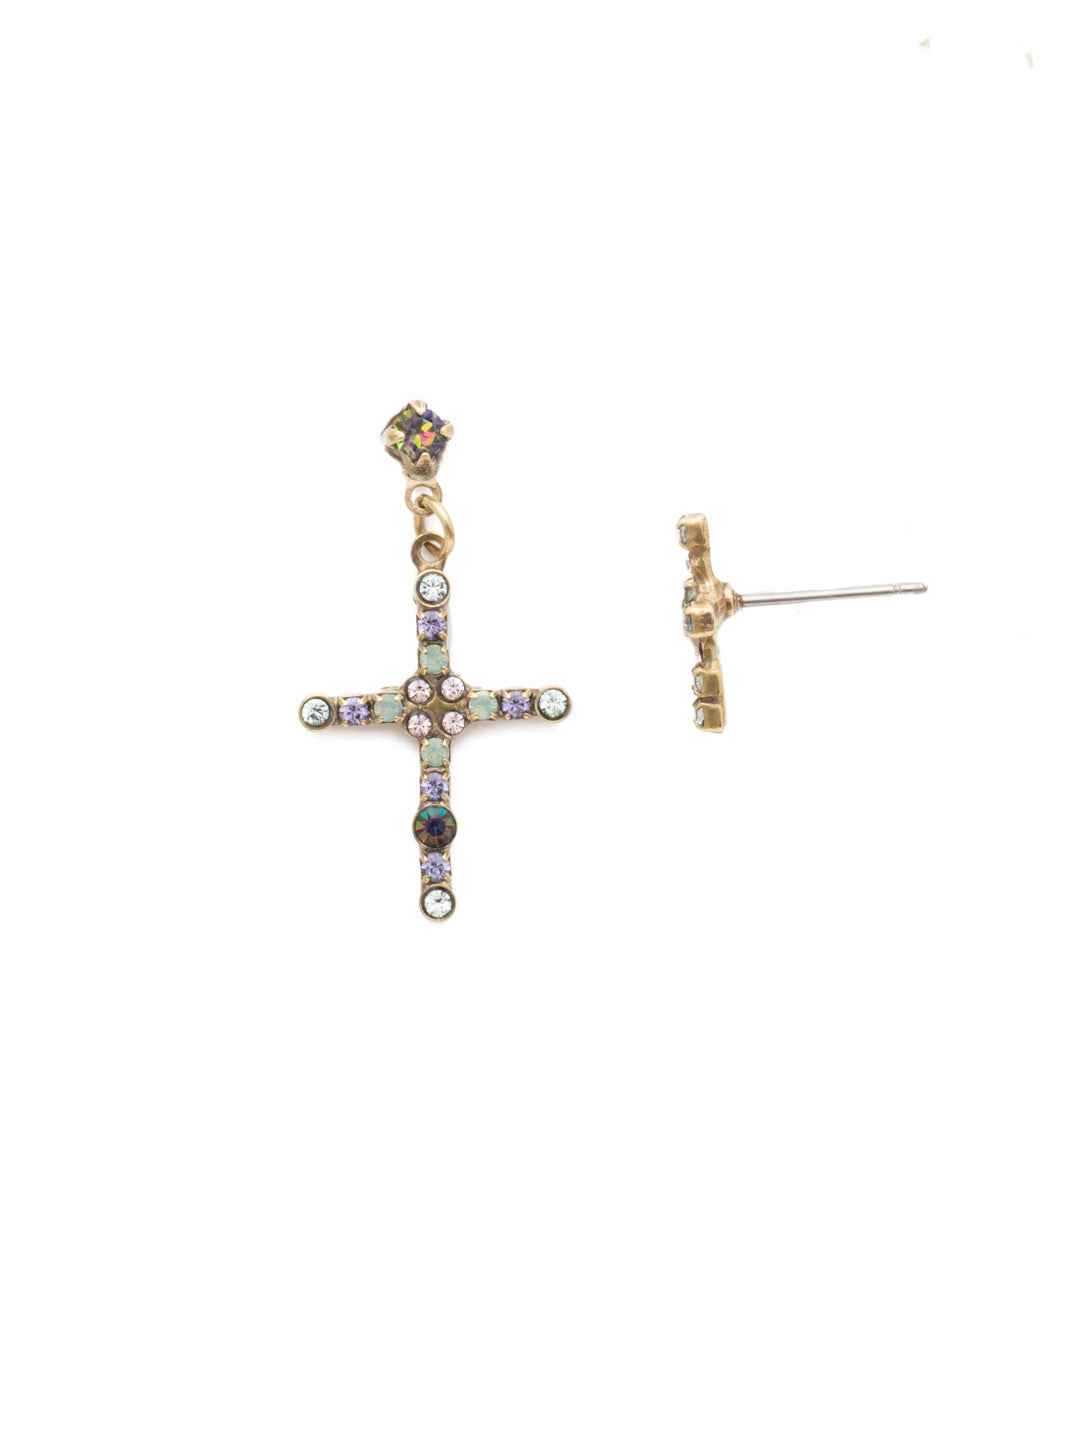 Alexis Stud Earrings - EEN2AGIRB - <p>The Alexis Stud Earrings are versatility in a cross style. Show you can rock the trend in a different way with these two unique crystal covered crosses: one is a simple, small stud; the other is a dangler in a larger size. From Sorrelli's Iris Bloom collection in our Antique Gold-tone finish.</p>